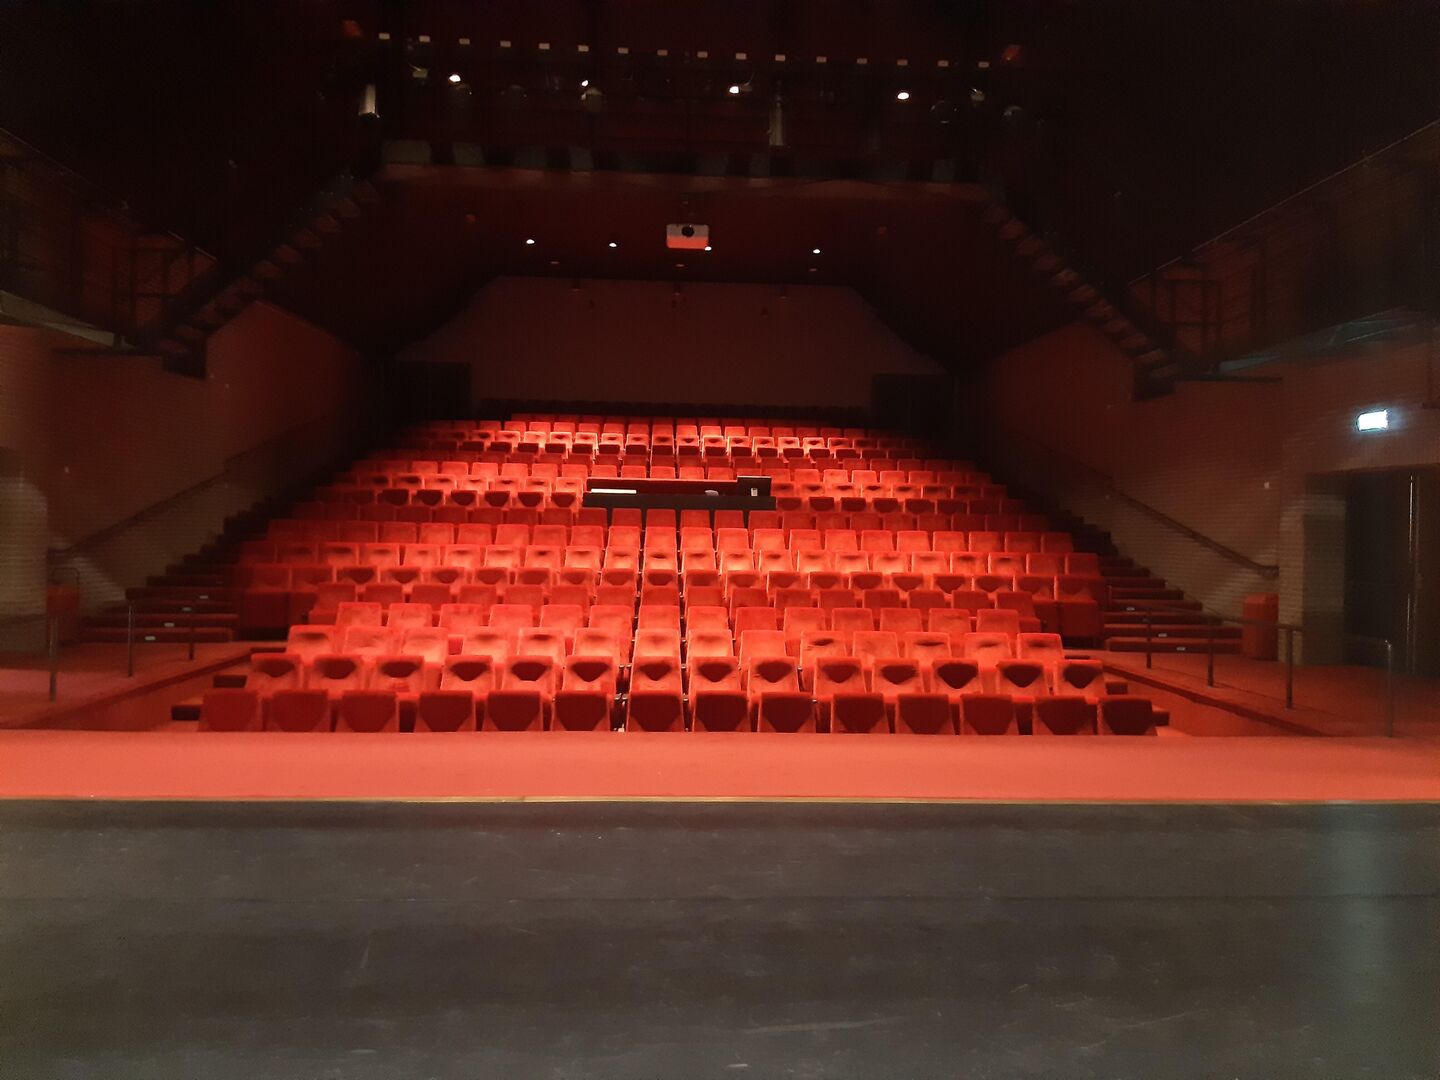 Theaterzaal